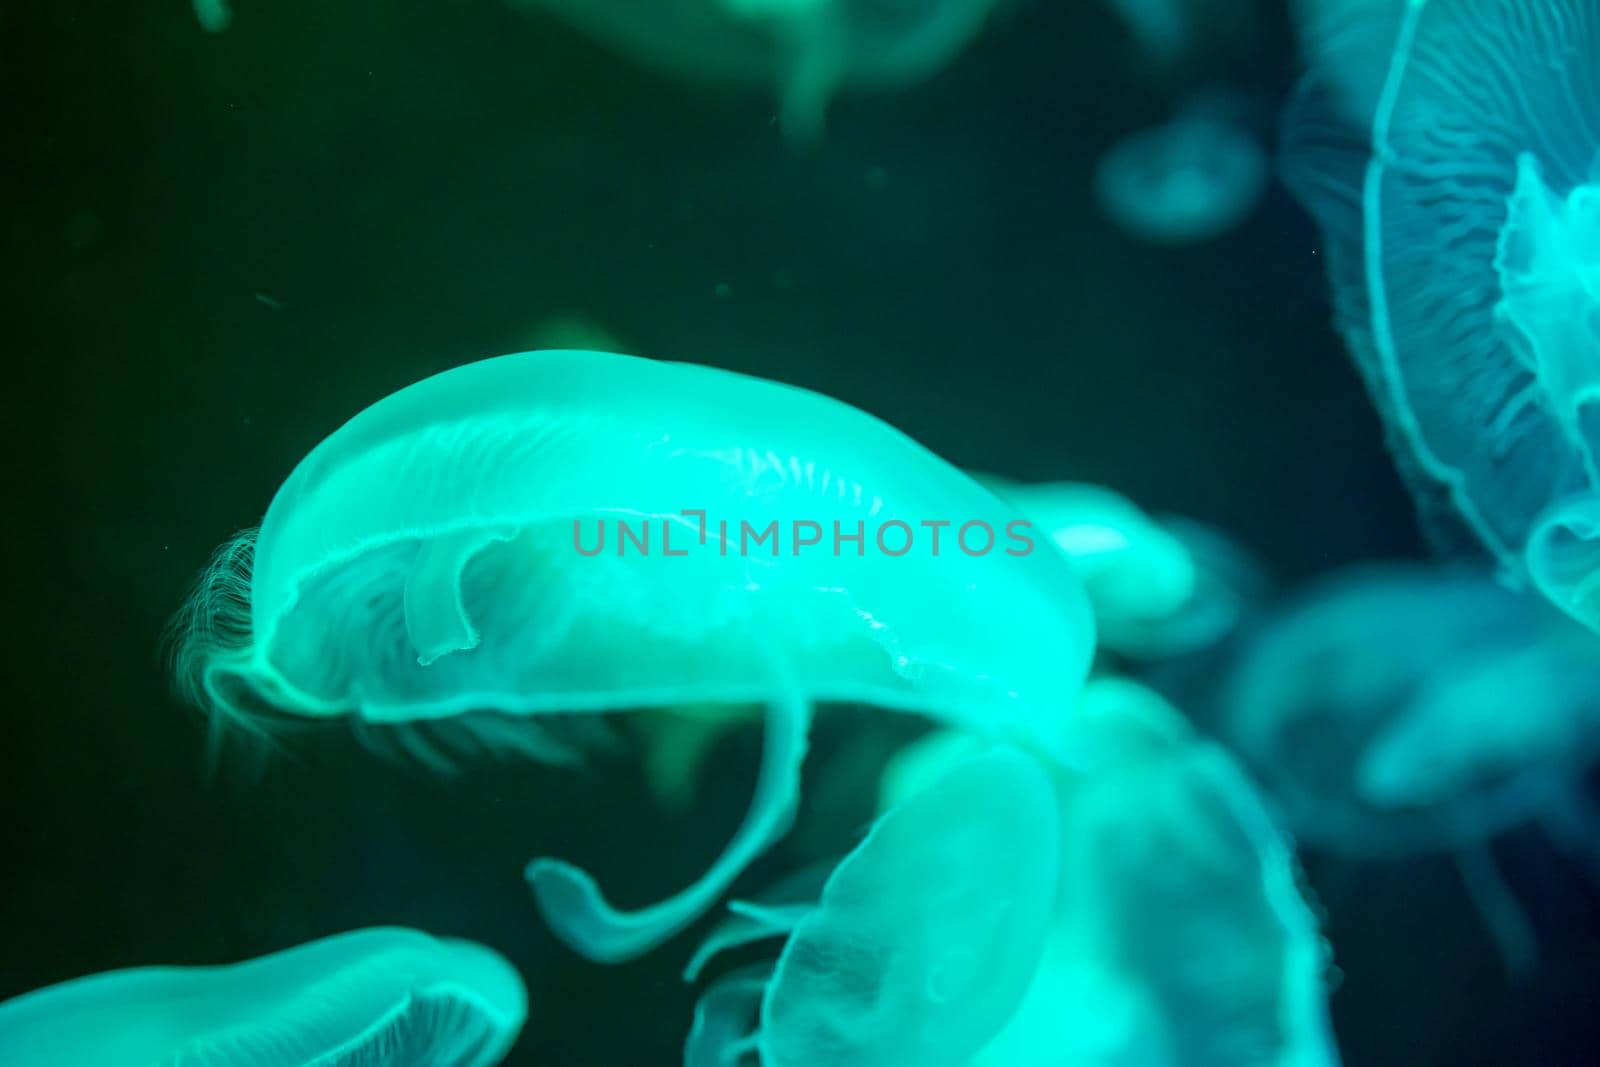 Blurry Colorful Jellyfishes floating on waters. Green Moon jellyfish Aurelia aurita by billroque